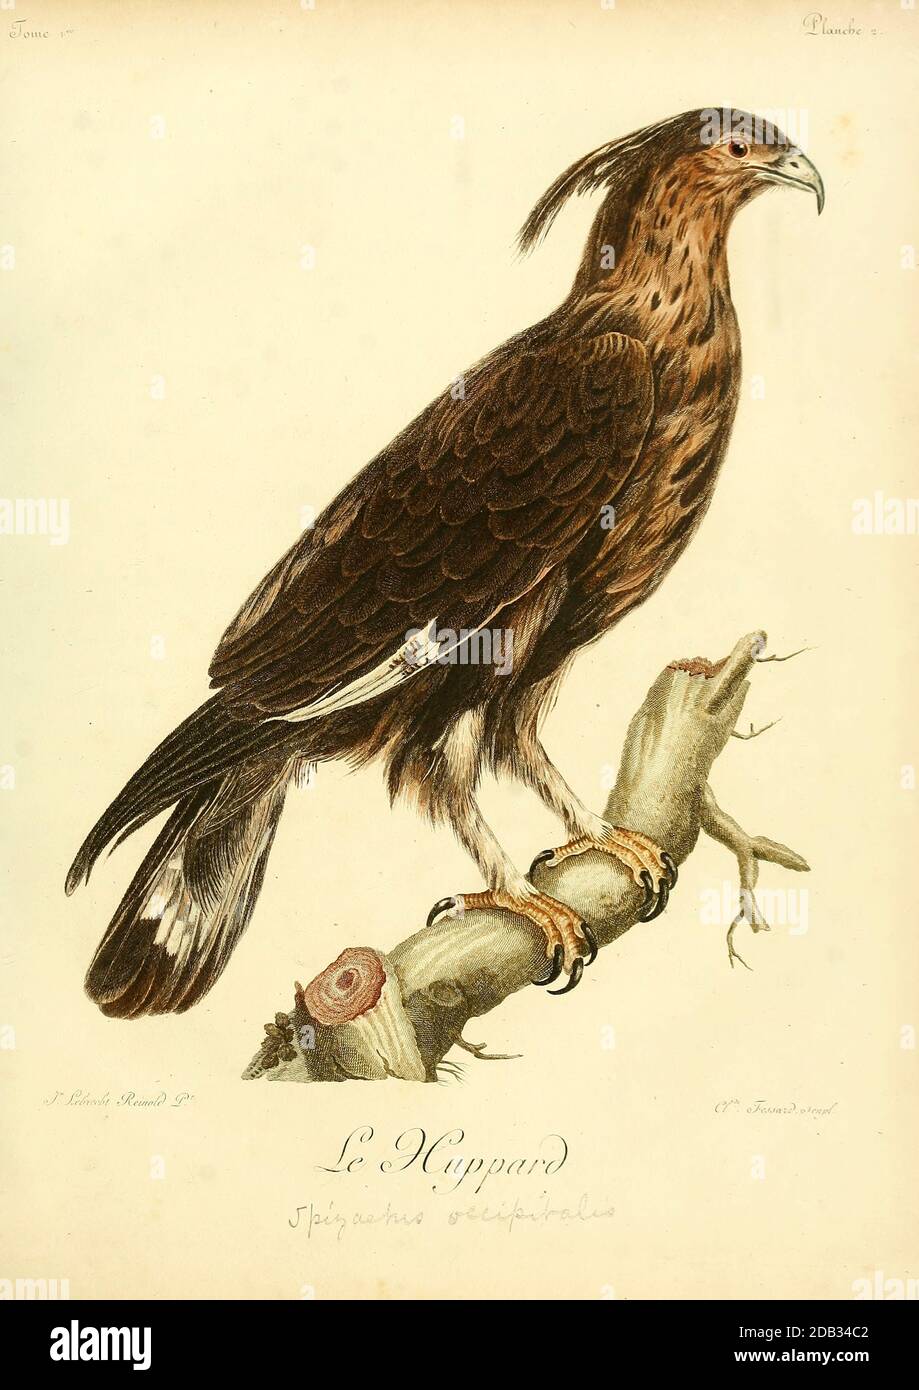 Huppard The long-crested eagle (Lophaetus occipitalis) is an African bird of prey. Like all eagles, it is in the family Accipitridae. It is currently placed in a monotypic genus Lophaetus. Bird of Prey from the Book Histoire naturelle des oiseaux d'Afrique [Natural History of birds of Africa] by Le Vaillant, François, 1753-1824; Publish in Paris by Chez J.J. Fuchs, libraire .1799 Stock Photo